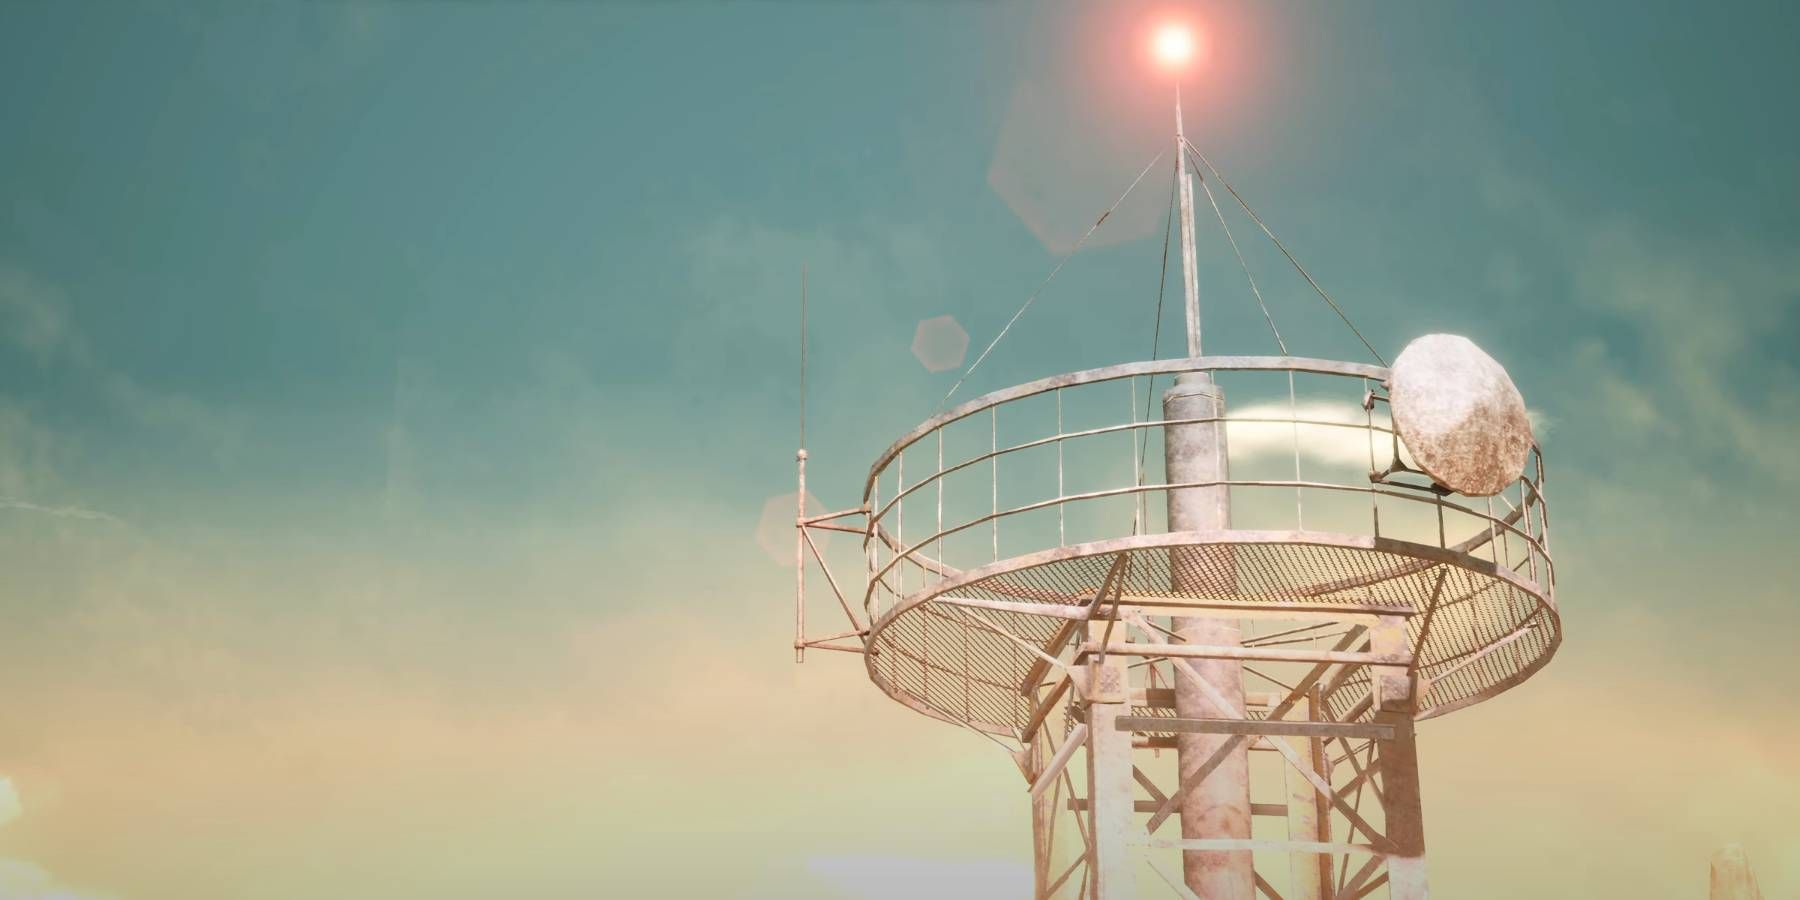 Sand Land: How to Fix Radio Towers